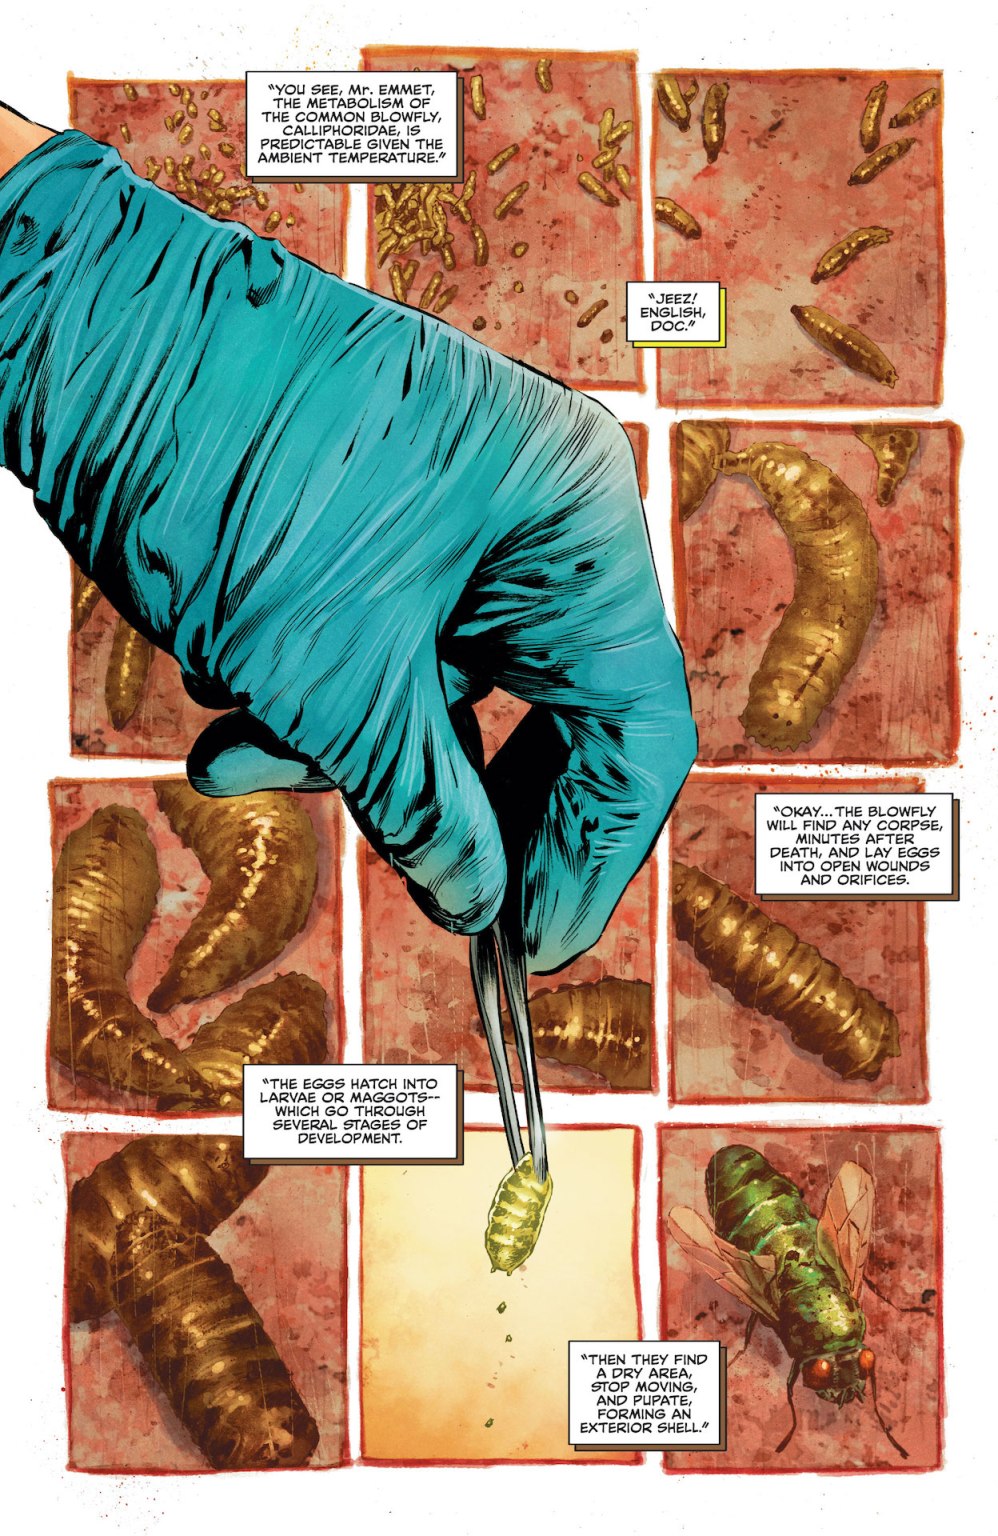 The Swamp Thing #1 preview